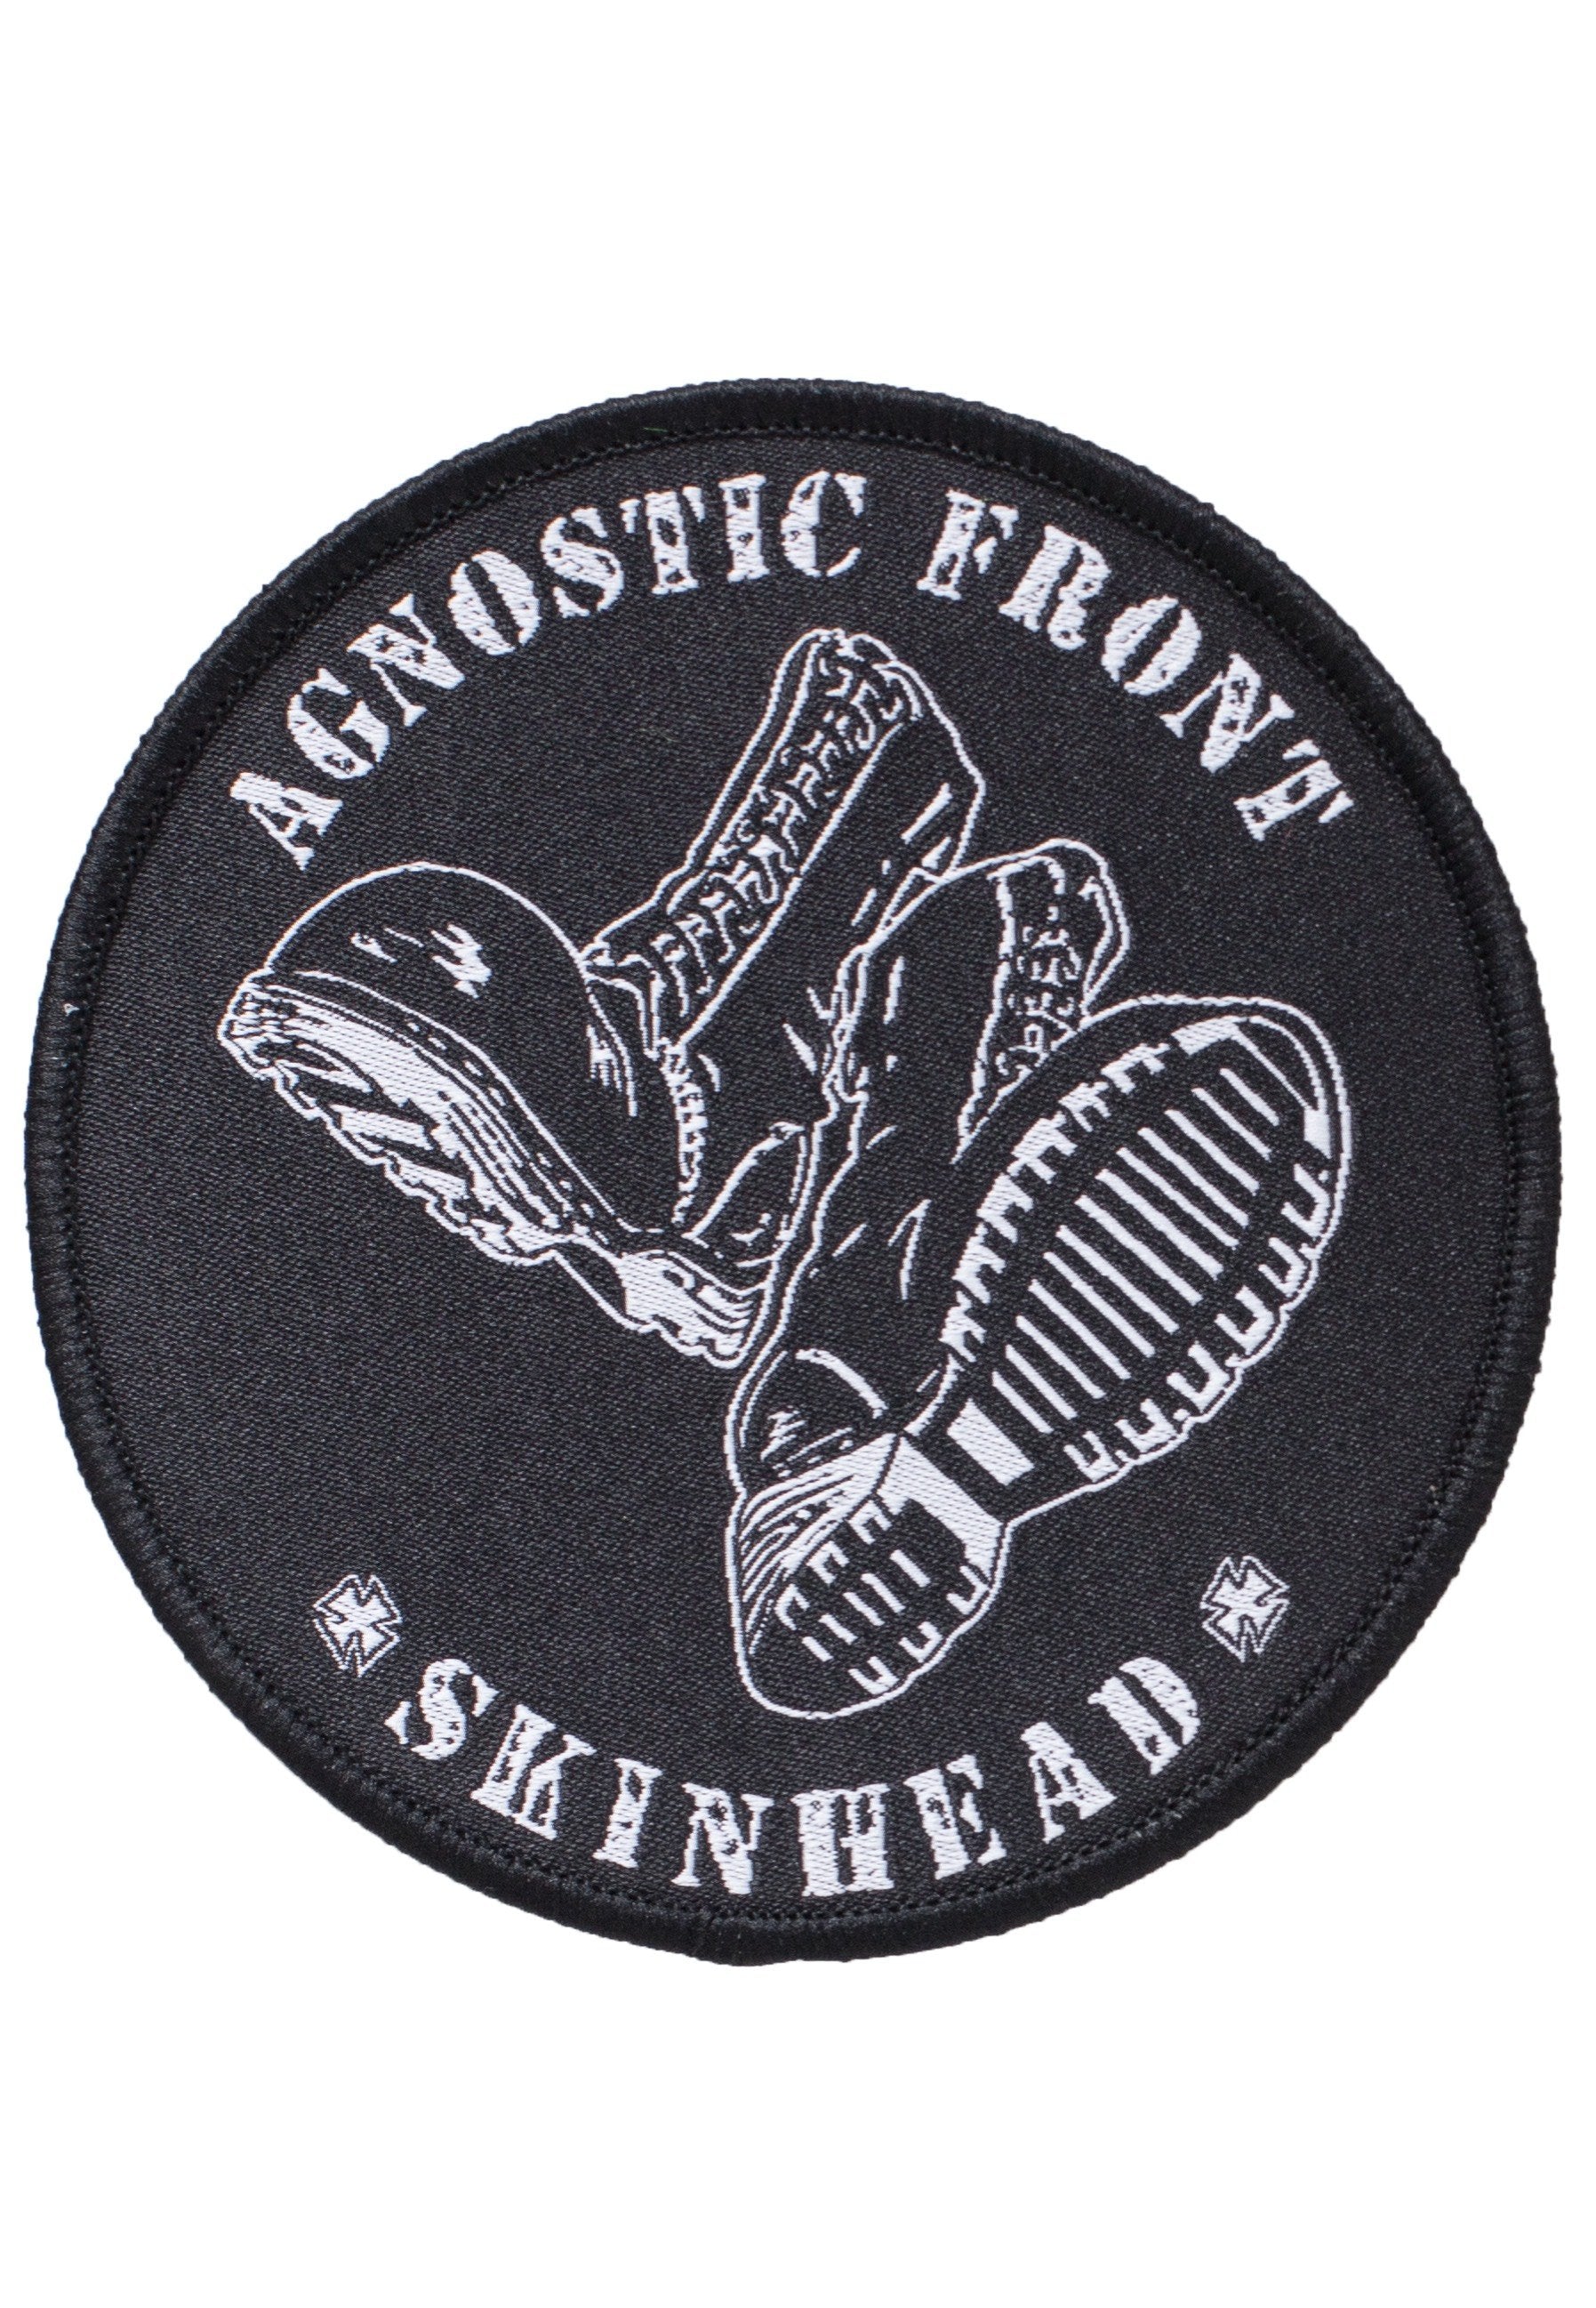 Agnostic Front - Boots Skinhead - Patch